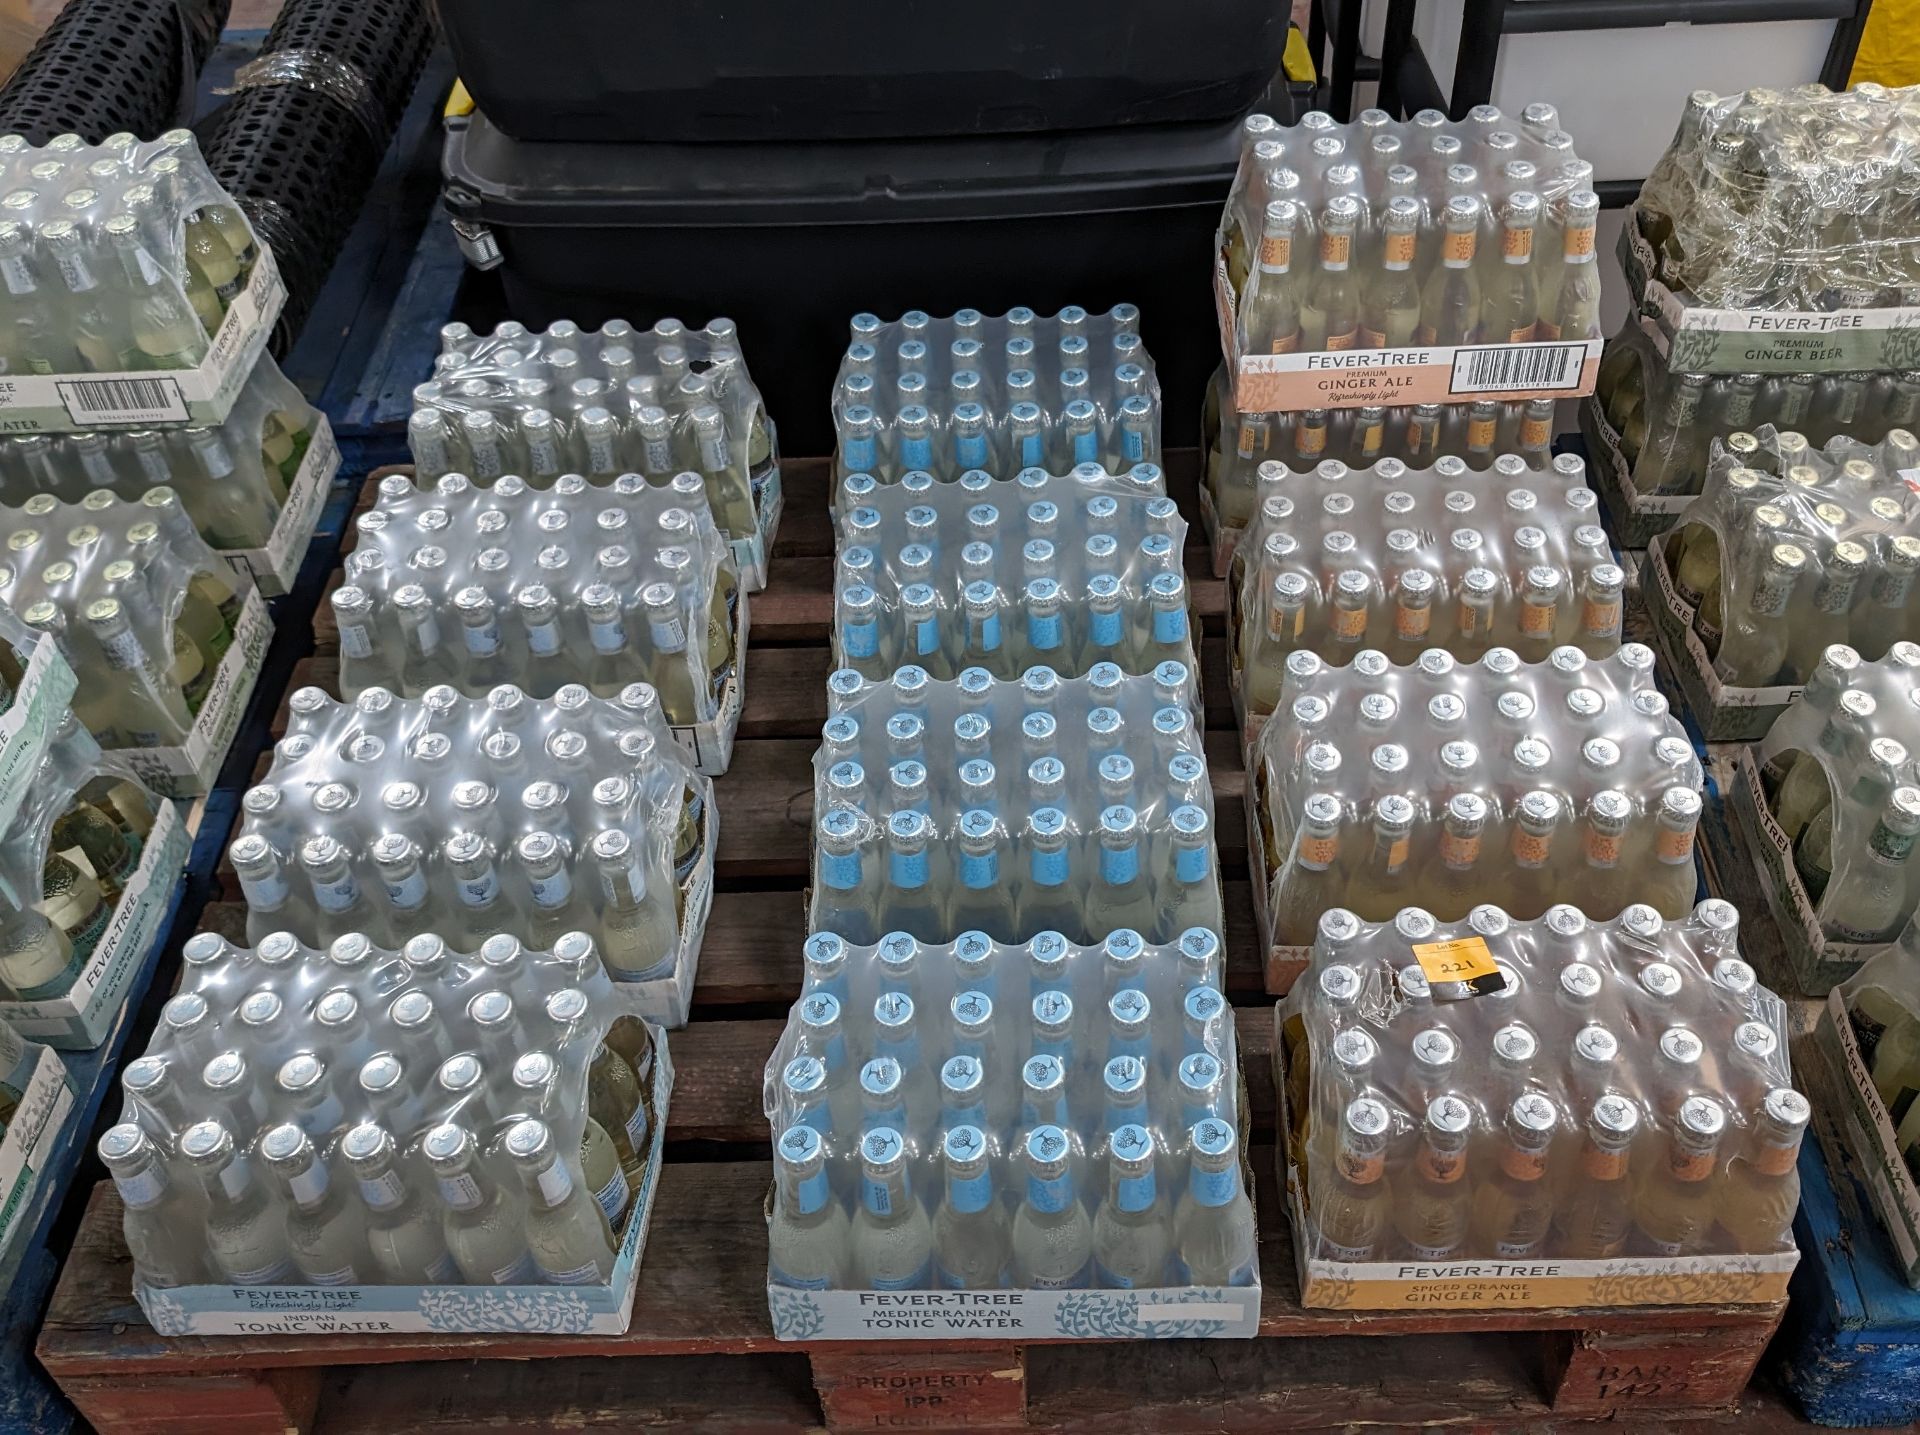 The contents of a pallet of Fever-Tree tonic water comprising 13 trays. NB: The Fever-Tree tonic w